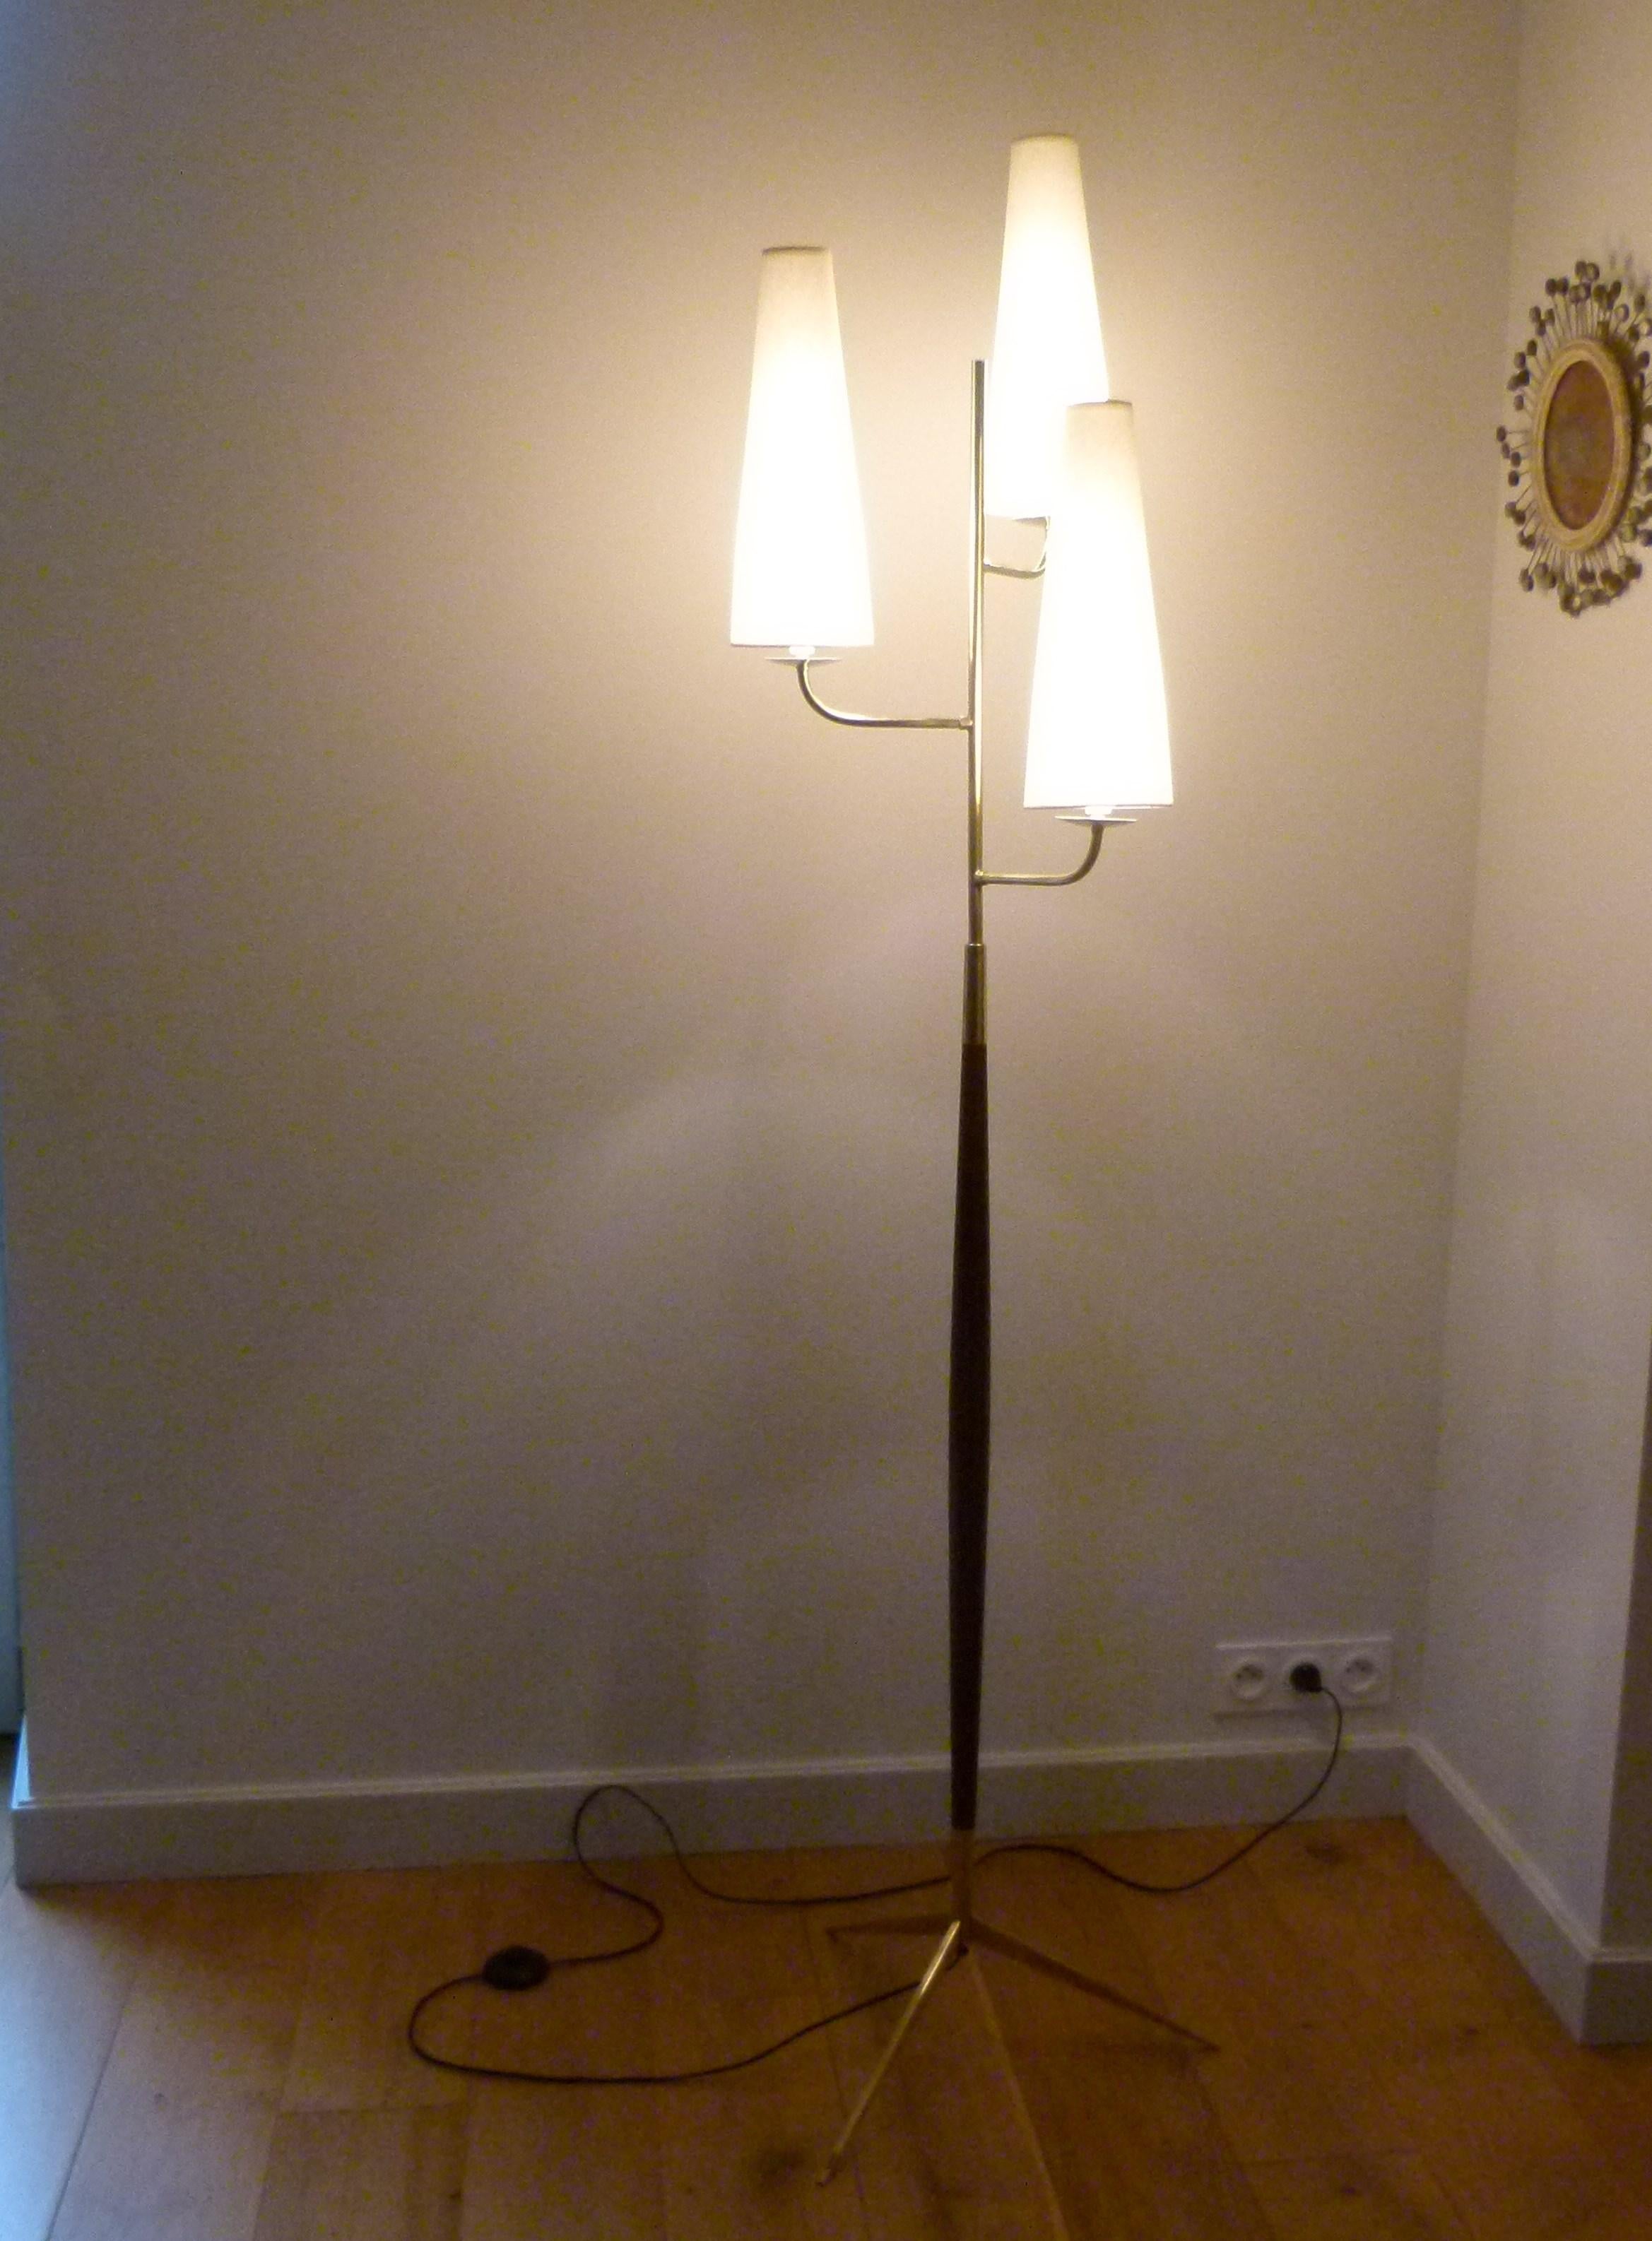 Triple light floor lamp consisting of a solid brass tripod foot on which is placed a conical trunk in varnished mahogany, on both sides of which are placed brass sconces.
On each arm is placed a conical shaped shade, diffusing the light.
This